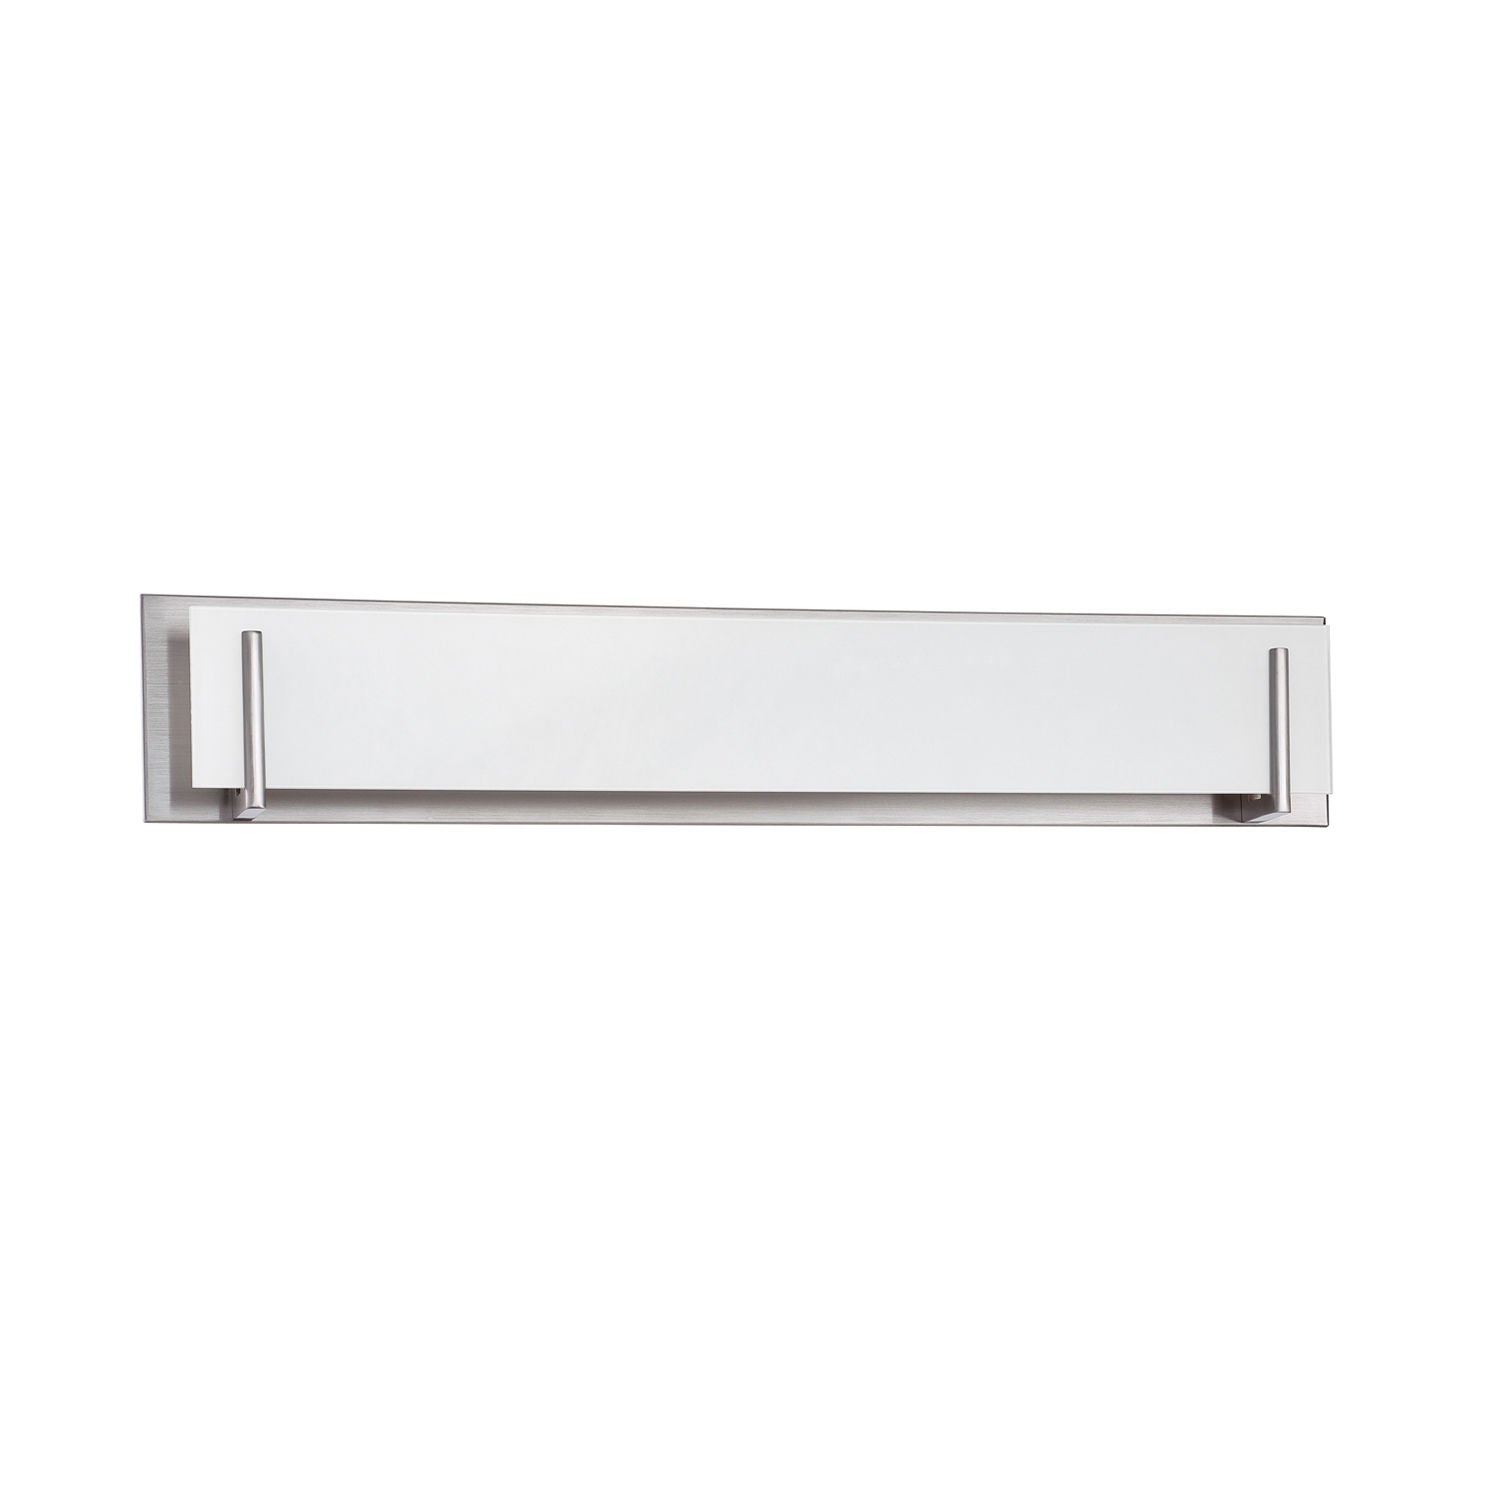 Aurora Bathroom sconce Stainless steel - VF2400WH-6L-SN | KENDAL